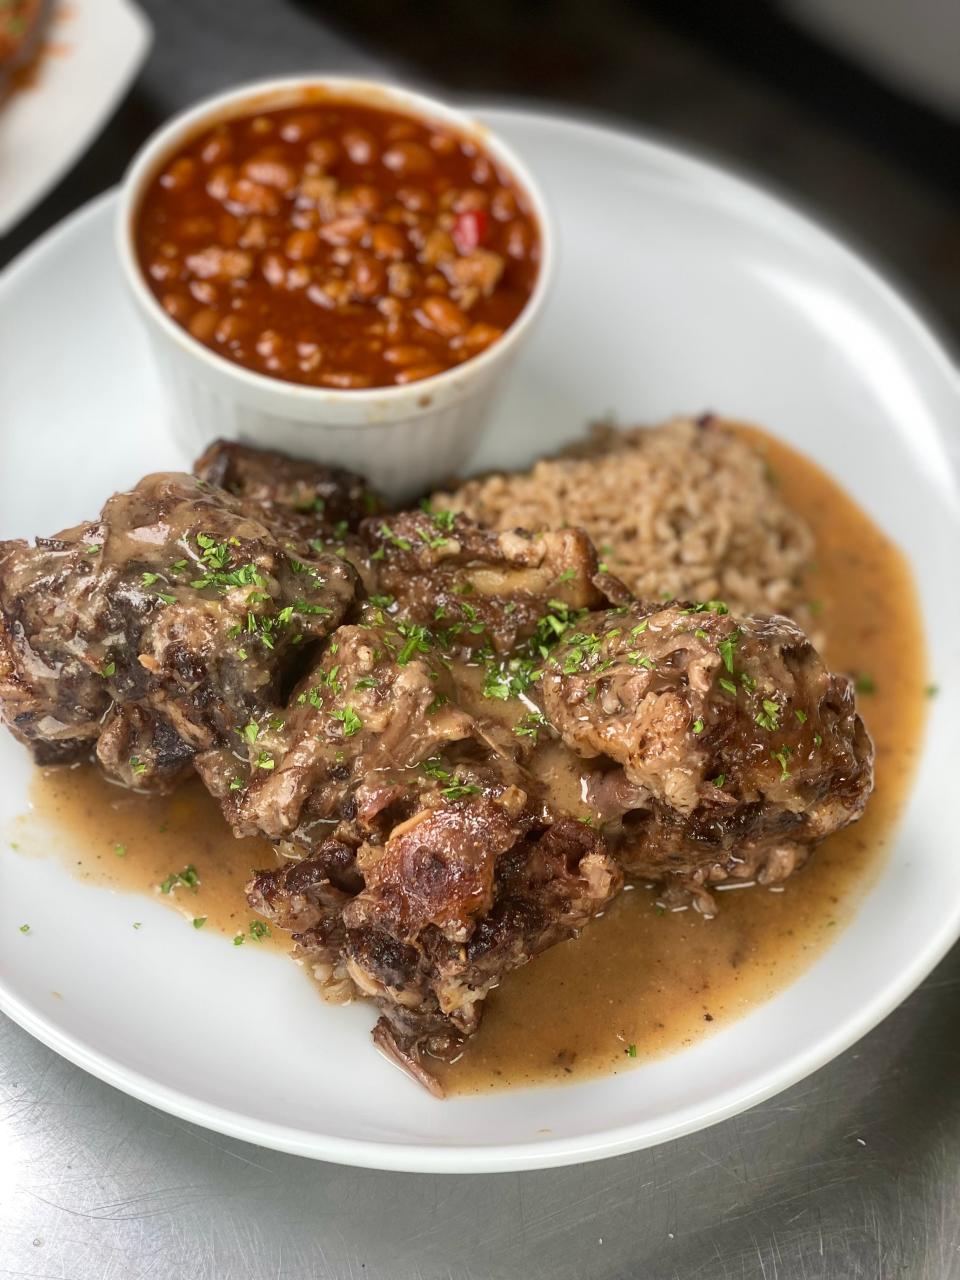 Caribbean Oxtails with Baked Beans at Trap Fusion in Memphis, TN.